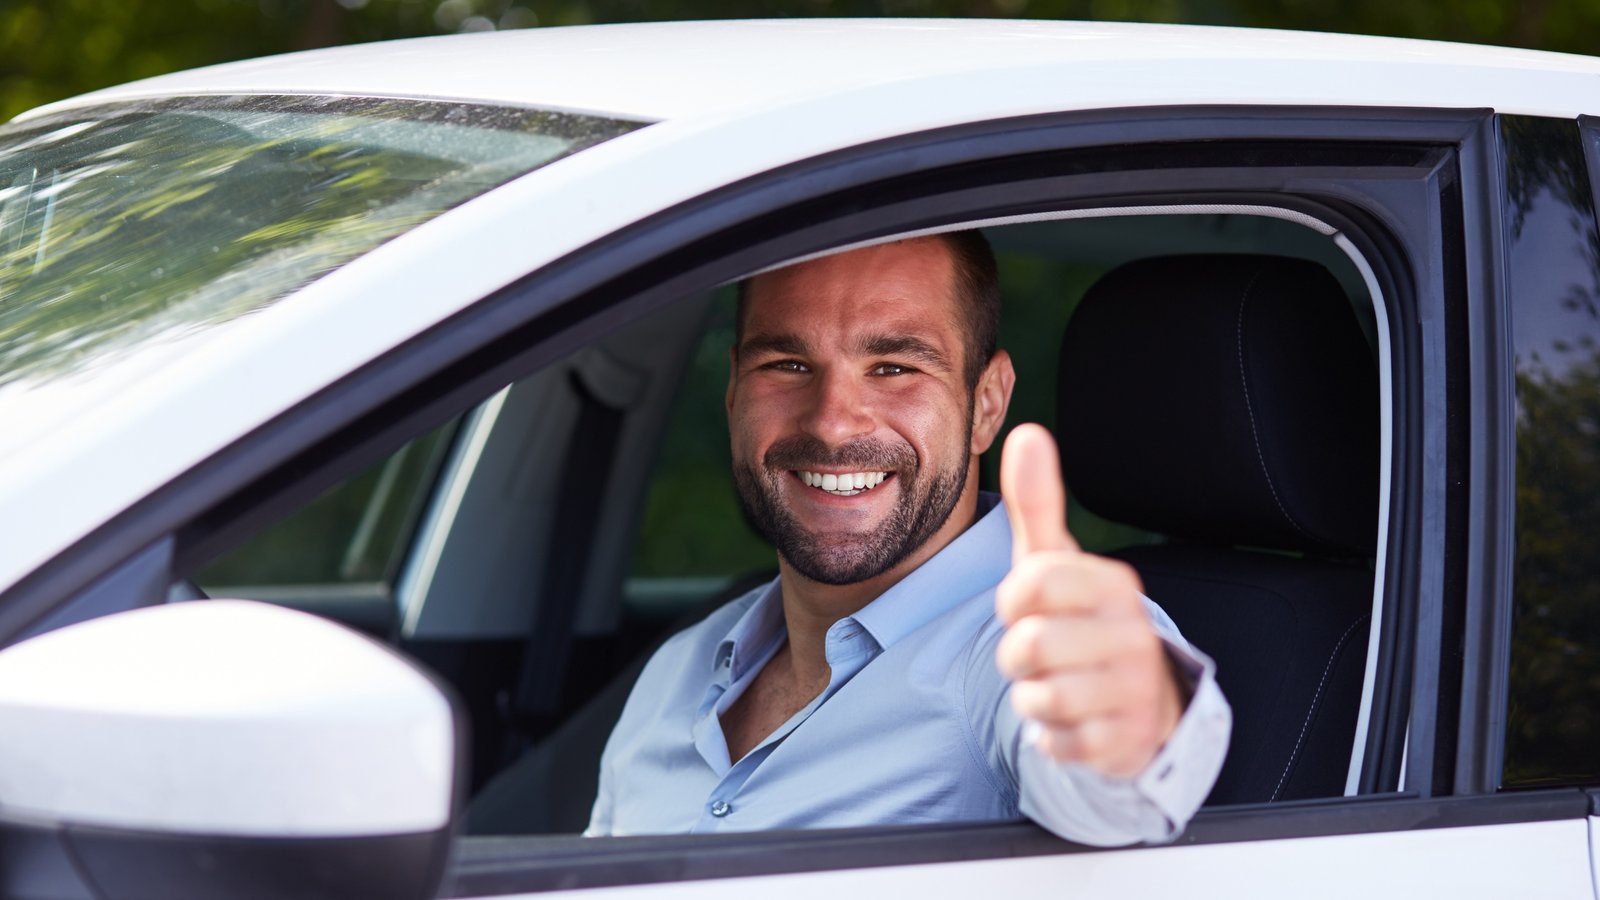 Tips for New Car Drivers